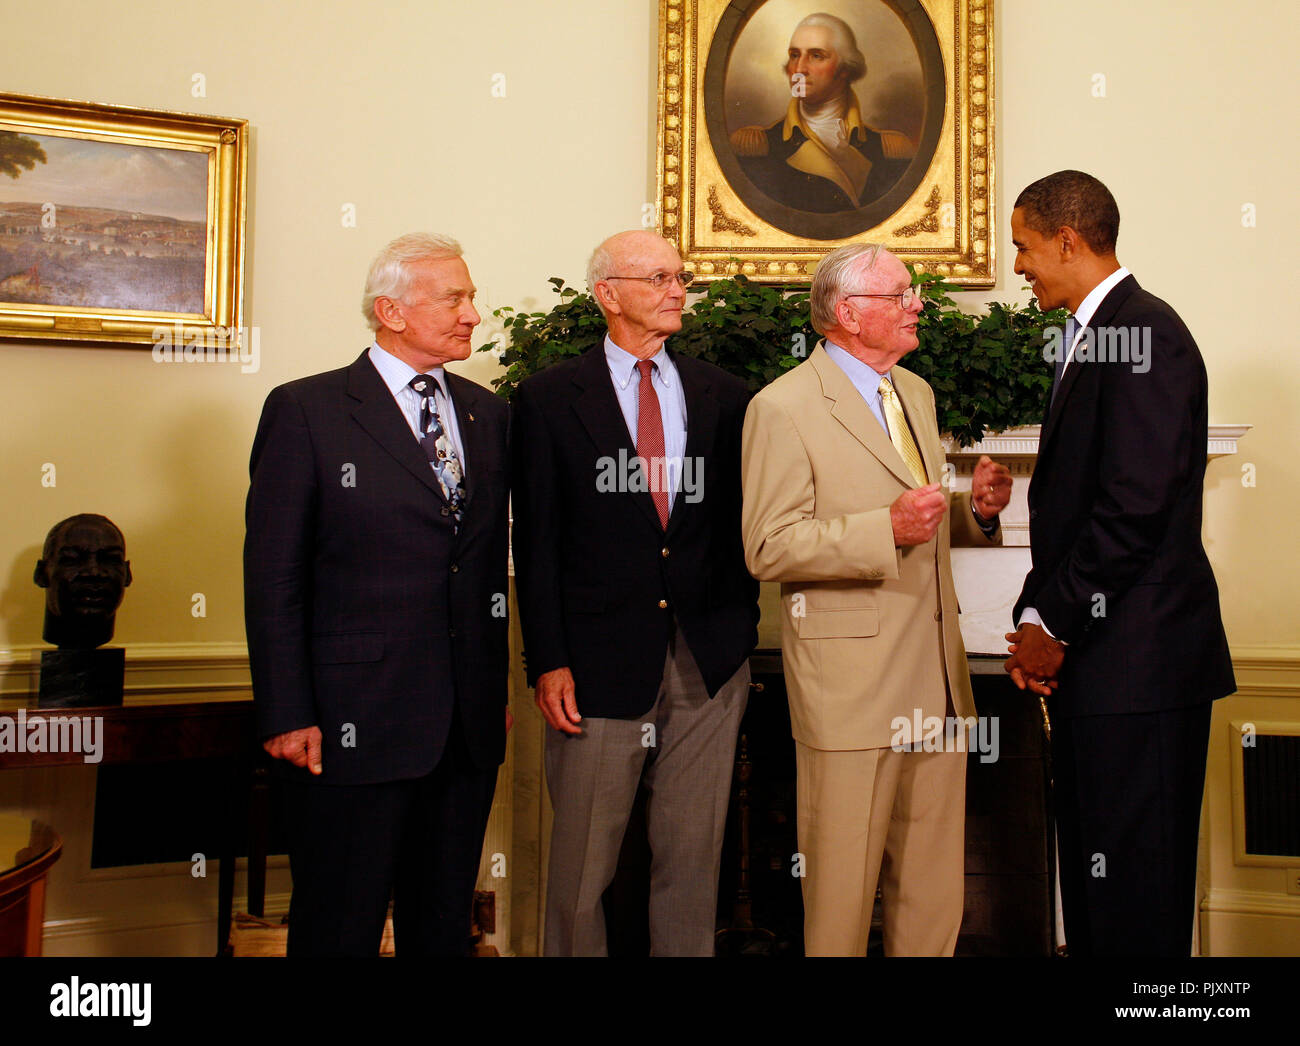 Washington, DC - July 20, 2009 -- United States President Barack Obama meets with Apollo 11 crew members (l-r) Edwin Eugene 'Buzz' Aldrin, Jr., Michael Collins, and Neil Armstrong in the Oval Office of the White House on the 40th anniversary of the astronauts' lunar landing, Washington, DC, Monday, July 20, 2009. .Credit: Martin H. Simon / Pool via CNP /MediaPunch Stock Photo